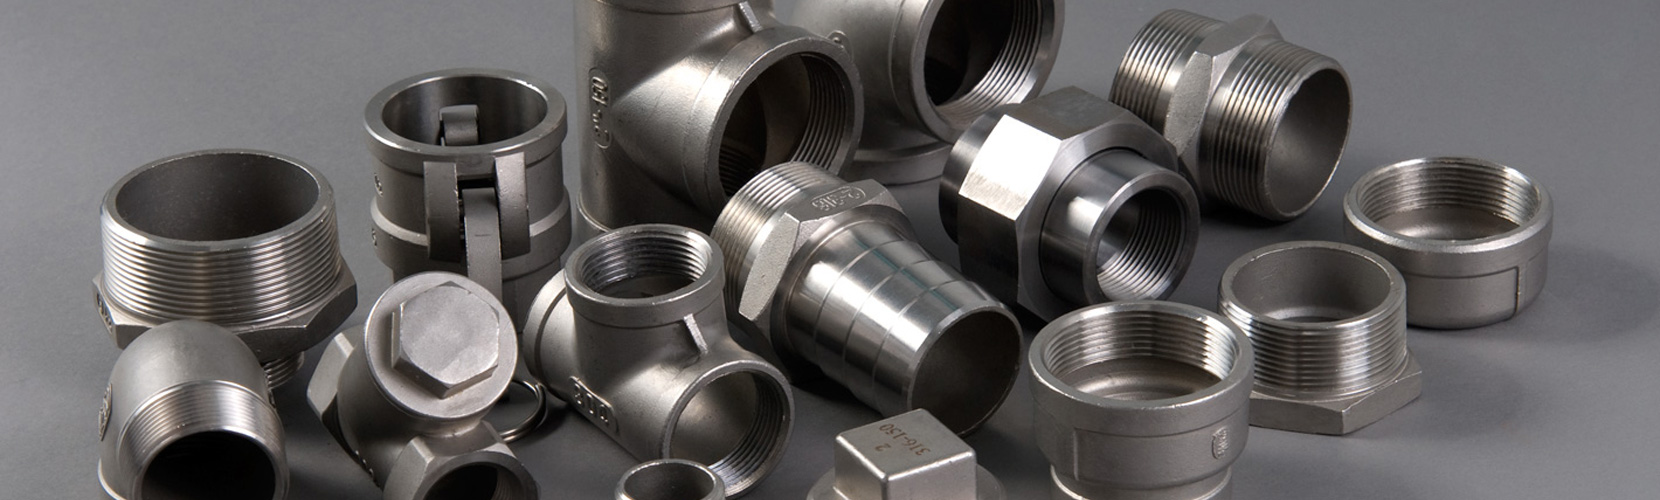 Stainless Steel Forged Fittings Exporter in Houston